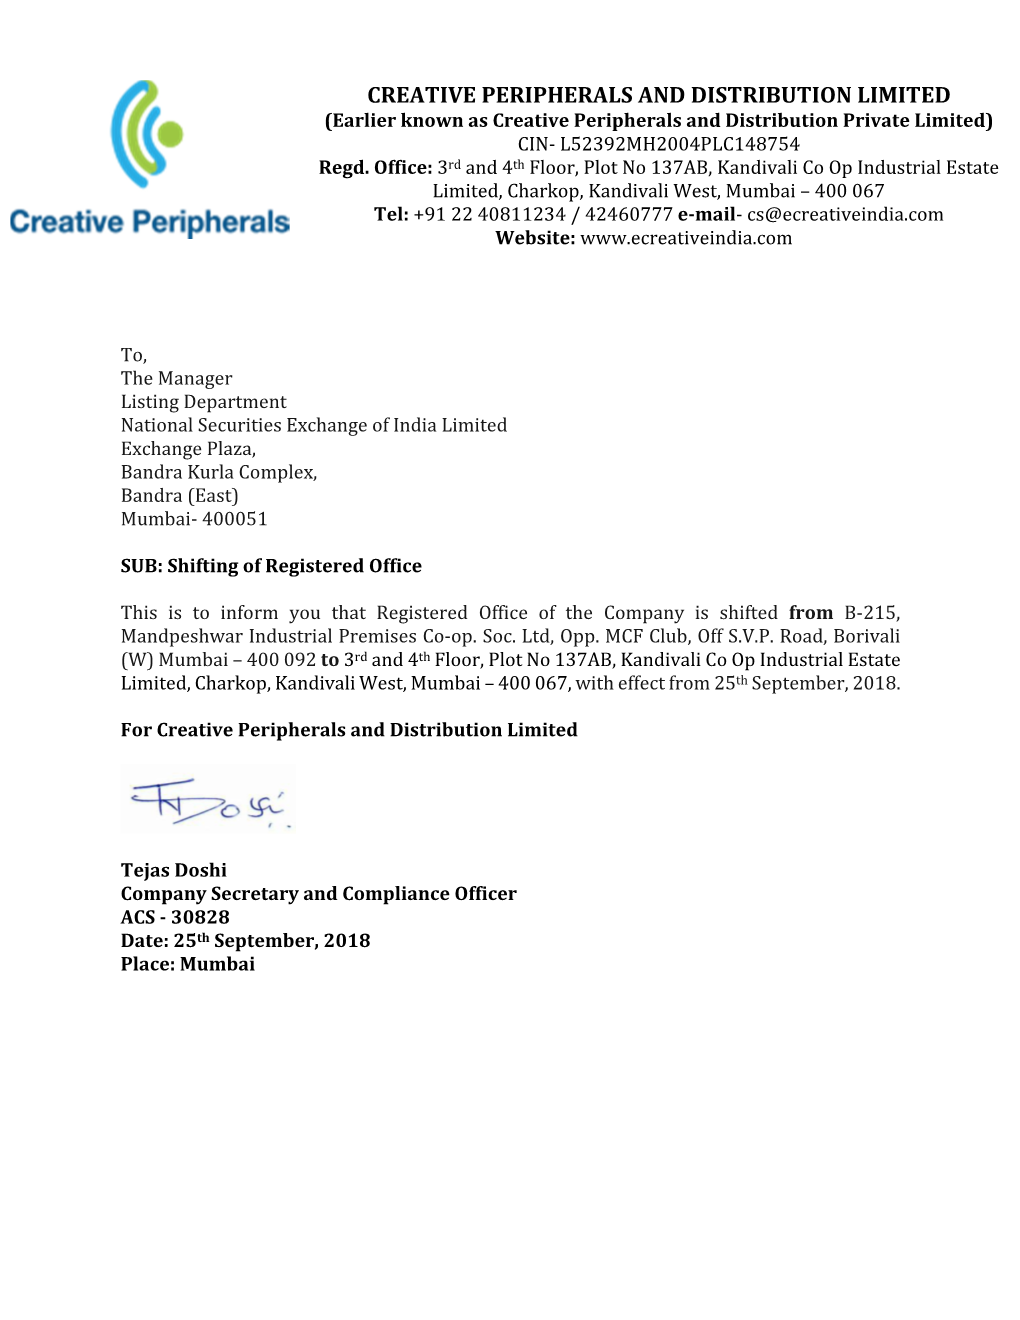 CREATIVE PERIPHERALS and DISTRIBUTION LIMITED (Earlier Known As Creative Peripherals and Distribution Private Limited) CIN- L52392MH2004PLC148754 Regd